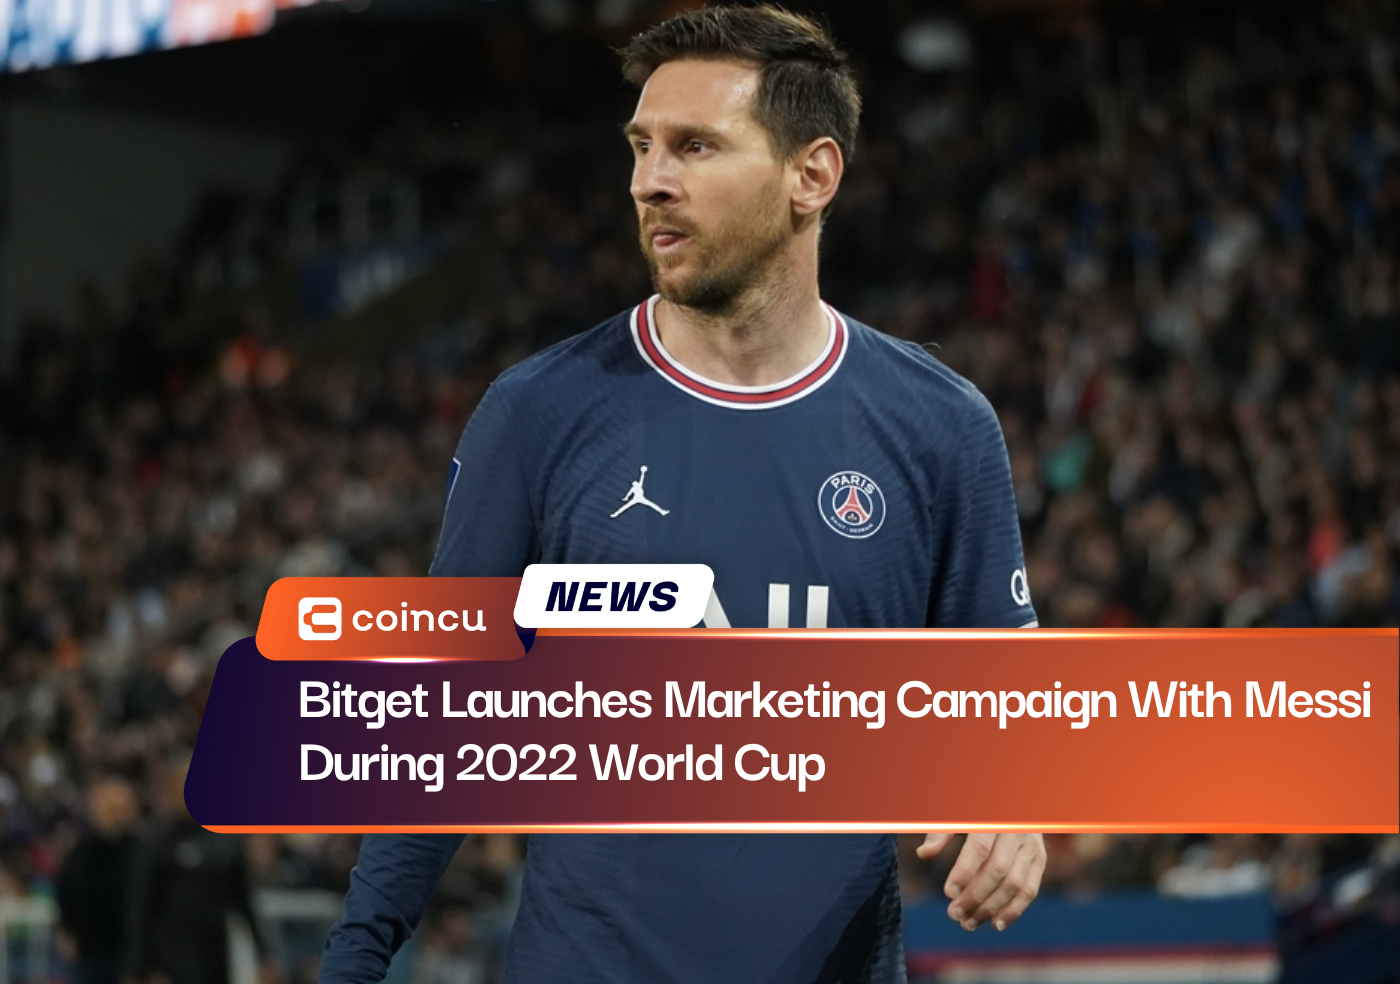 Bitget Launches Marketing Campaign With Messi During 2022 World Cup